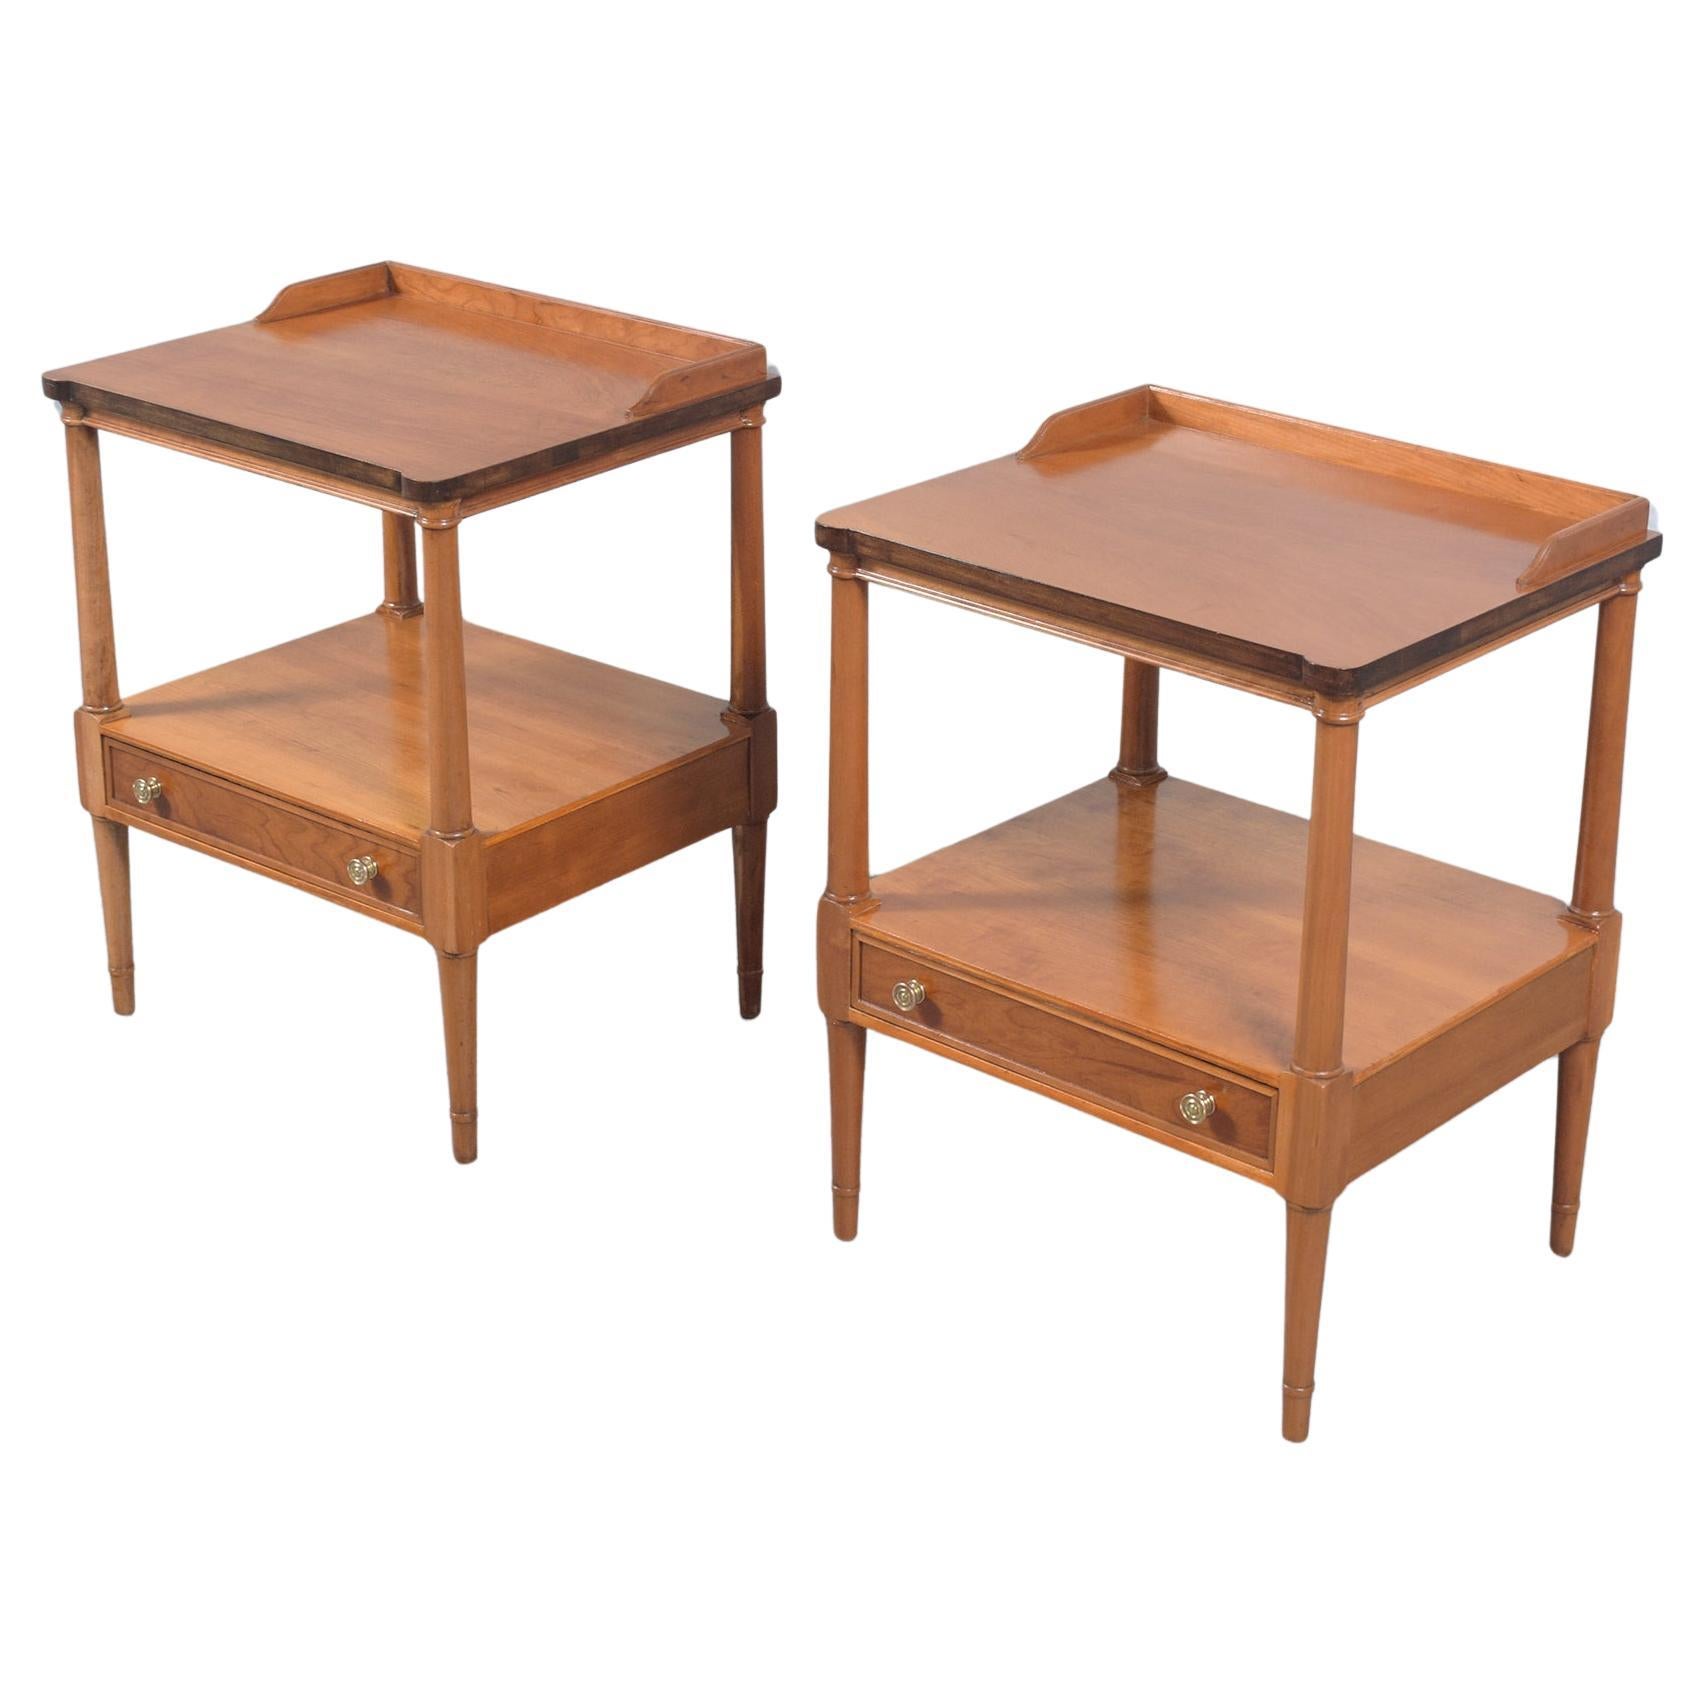 Elegant Handcrafted Maple Bedside Tables with Brass Handles and Tapered Legs